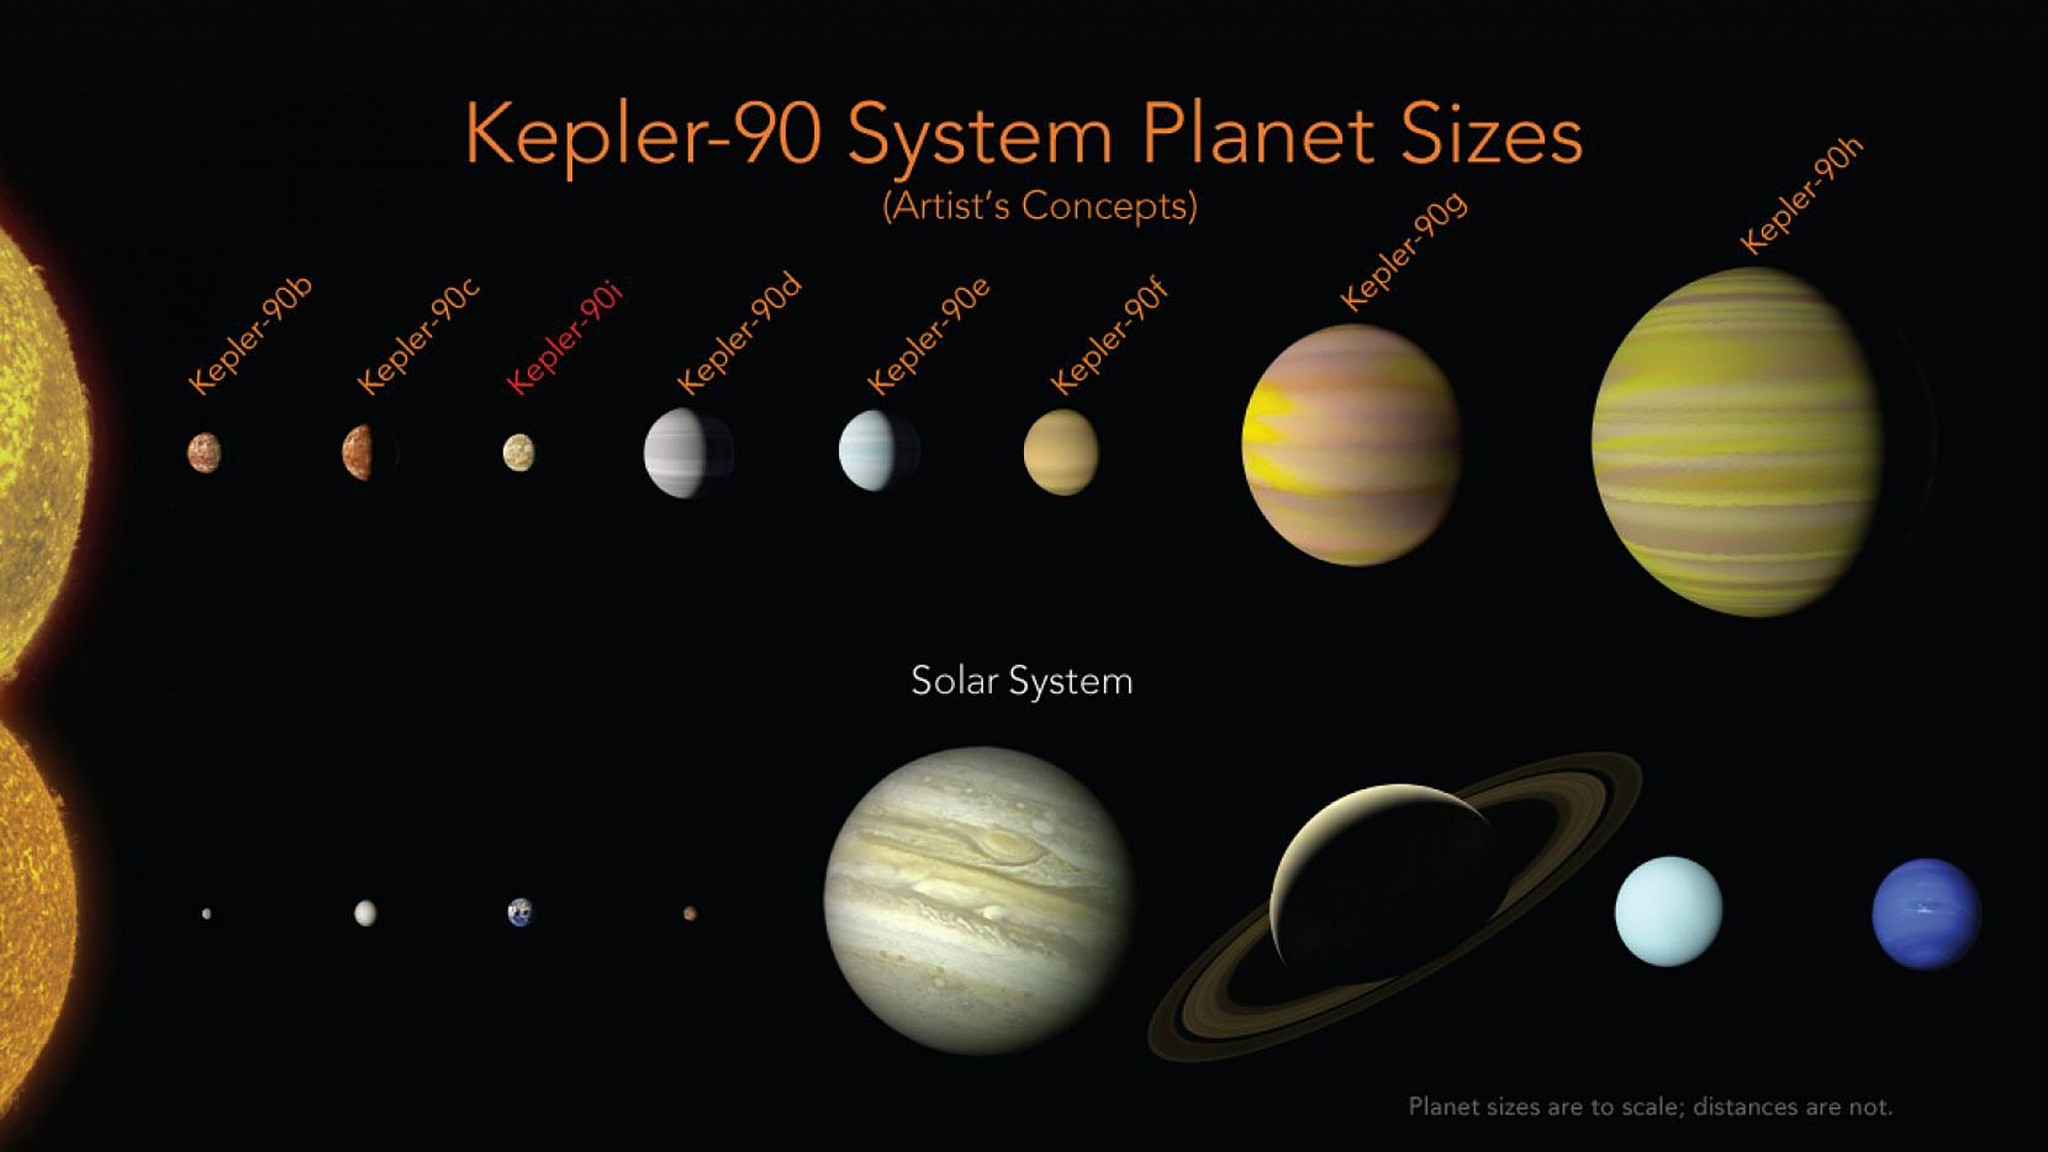 Tying record, machine finds eighth planet in distant solar system